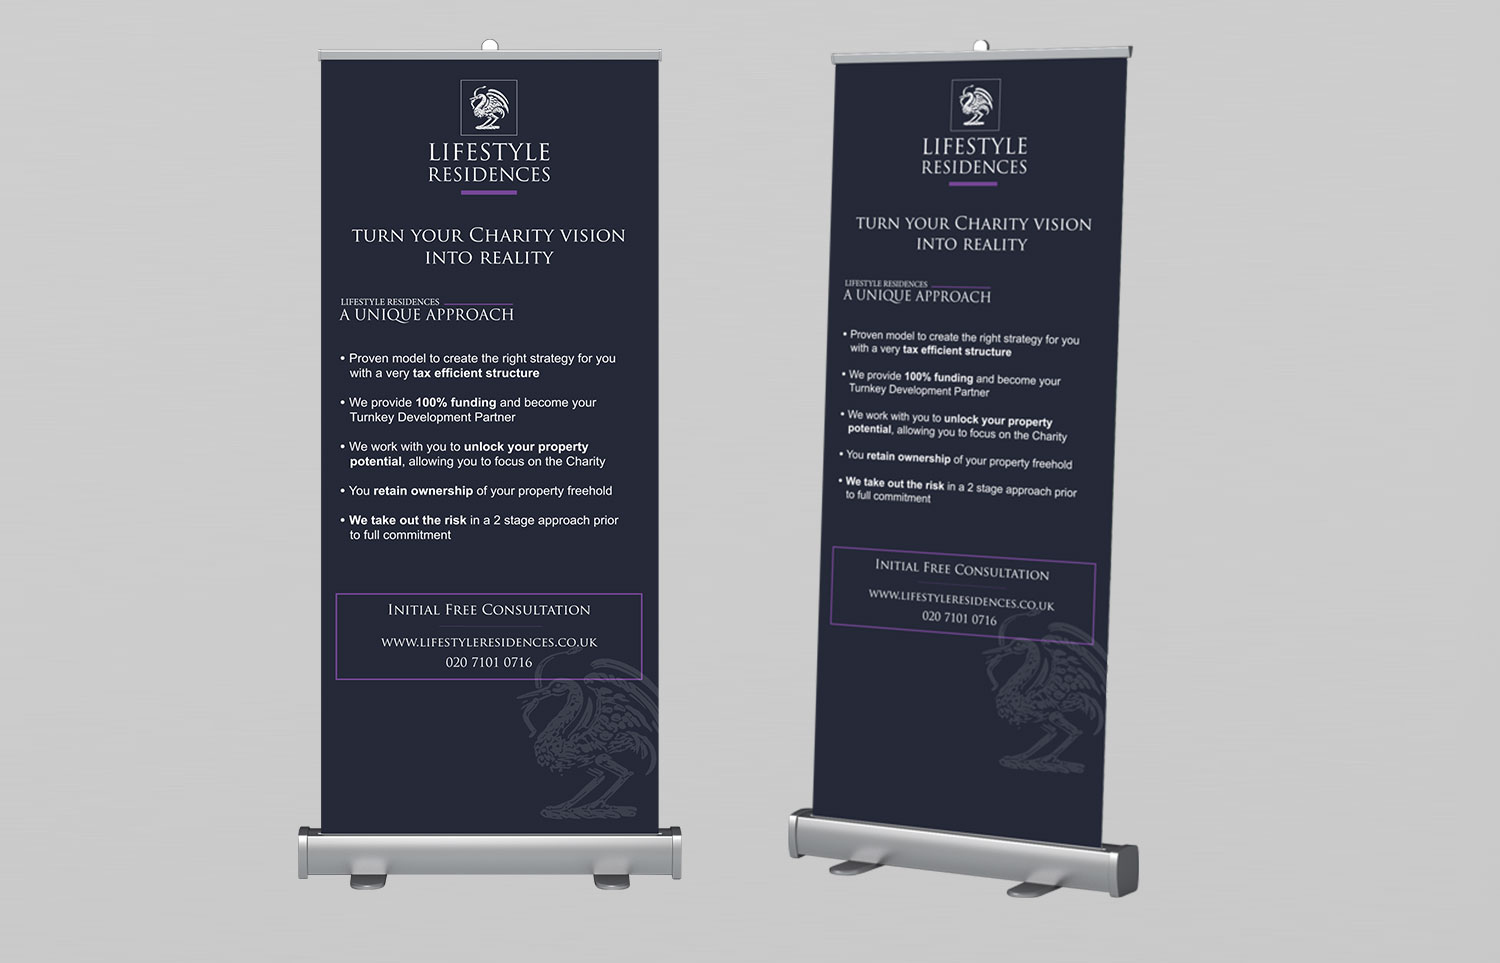 Lifestyle Residences Banners